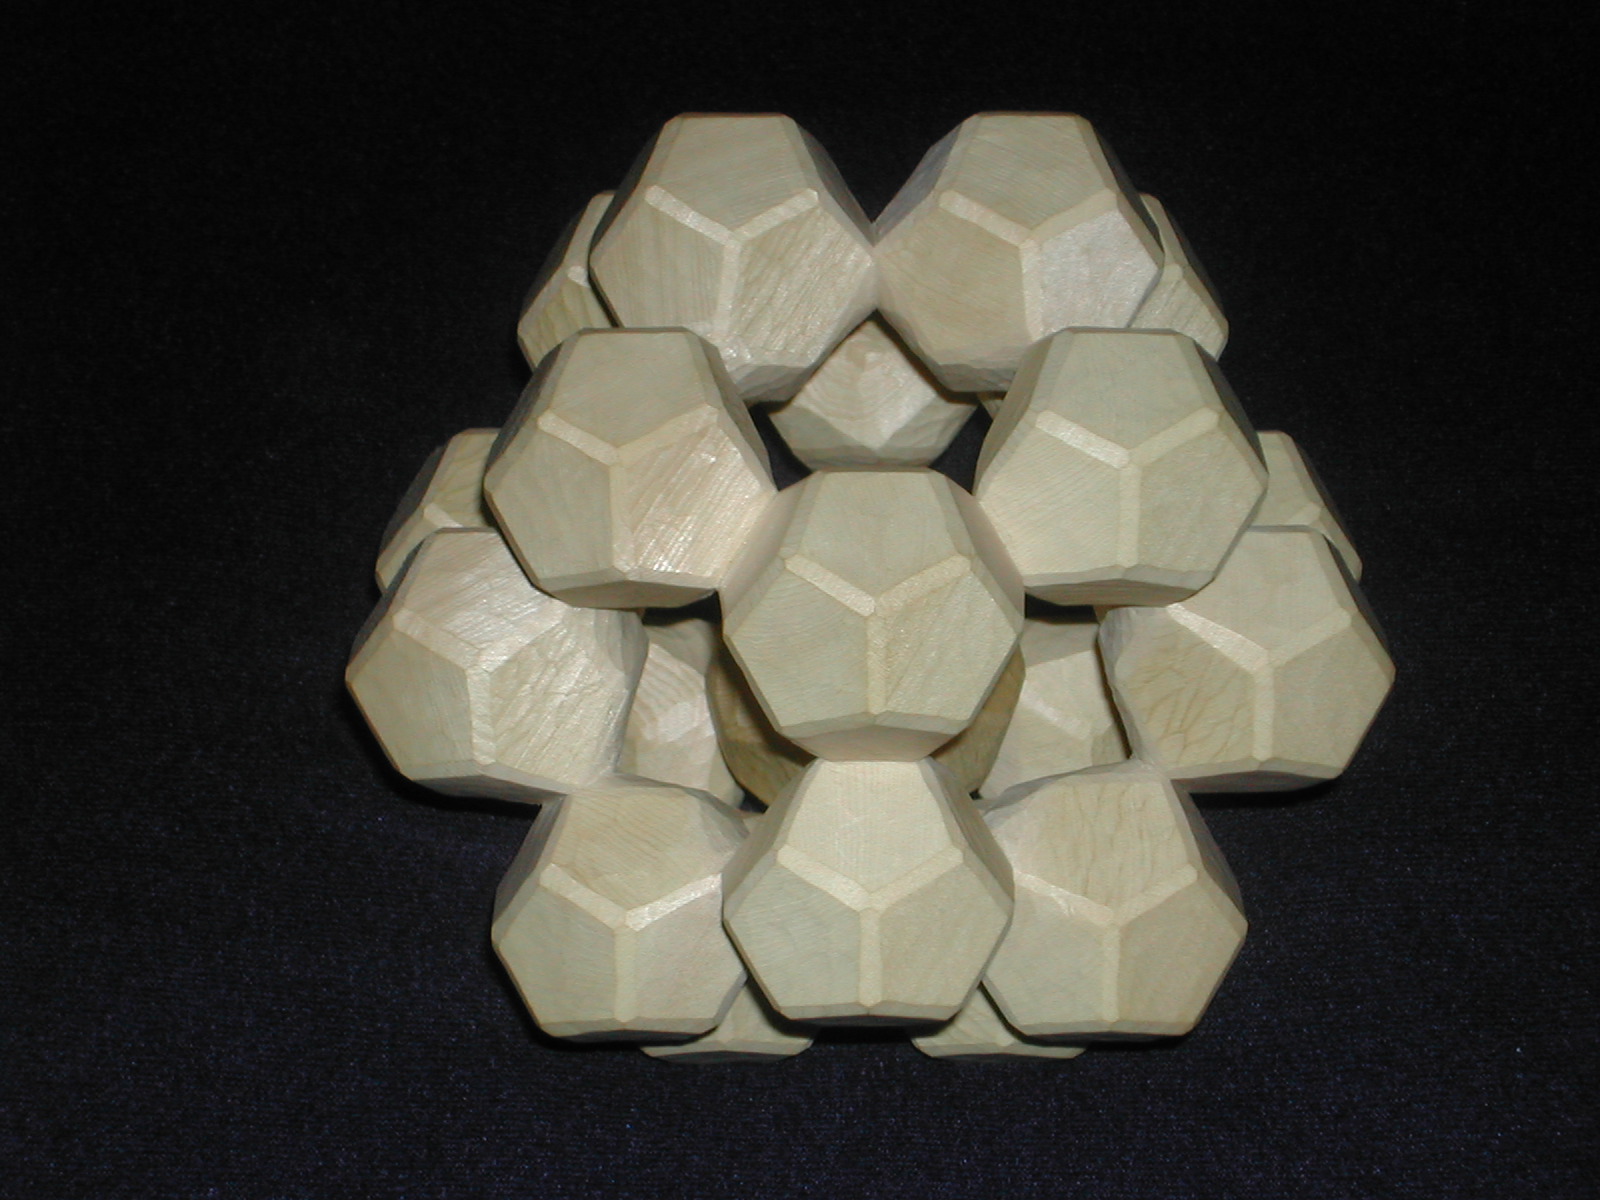 A dodecahedron made of 20 dodecahedra; fractilian. 